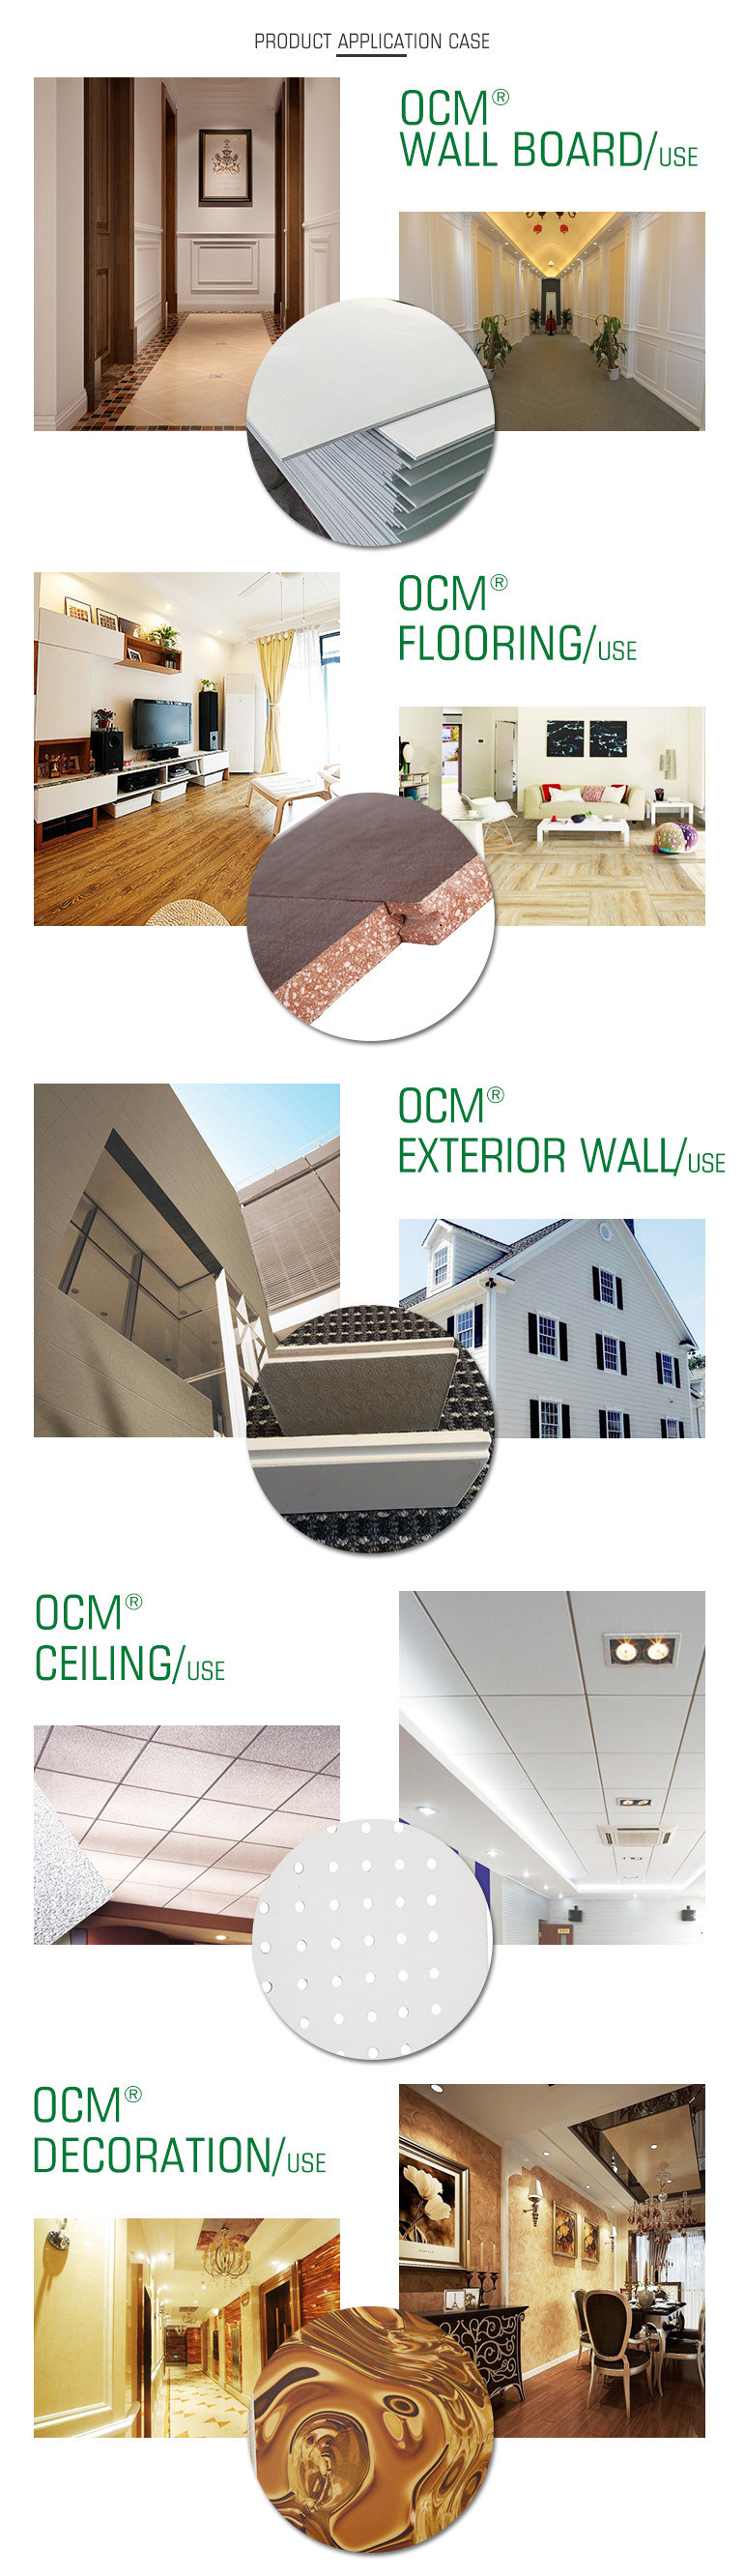 No Rusting MGO Fireproof Board Architectural Exterior Panels